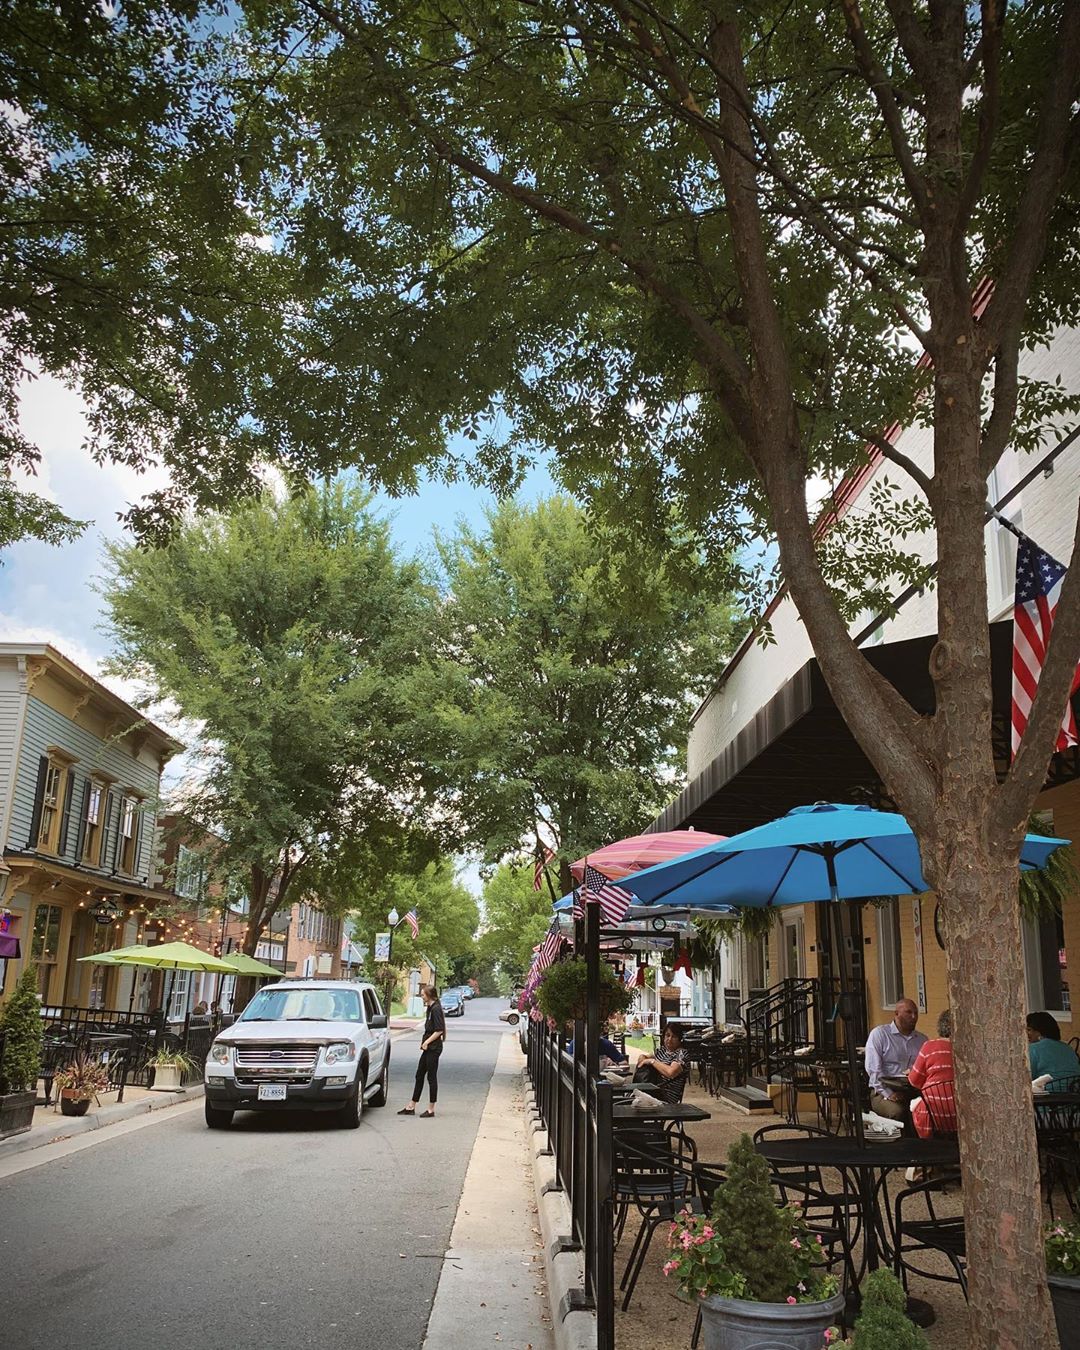 Street view of restaurants and colorful umbrellas in Old Town Manassas, VA. Photo by Instagram user @makeupdelight